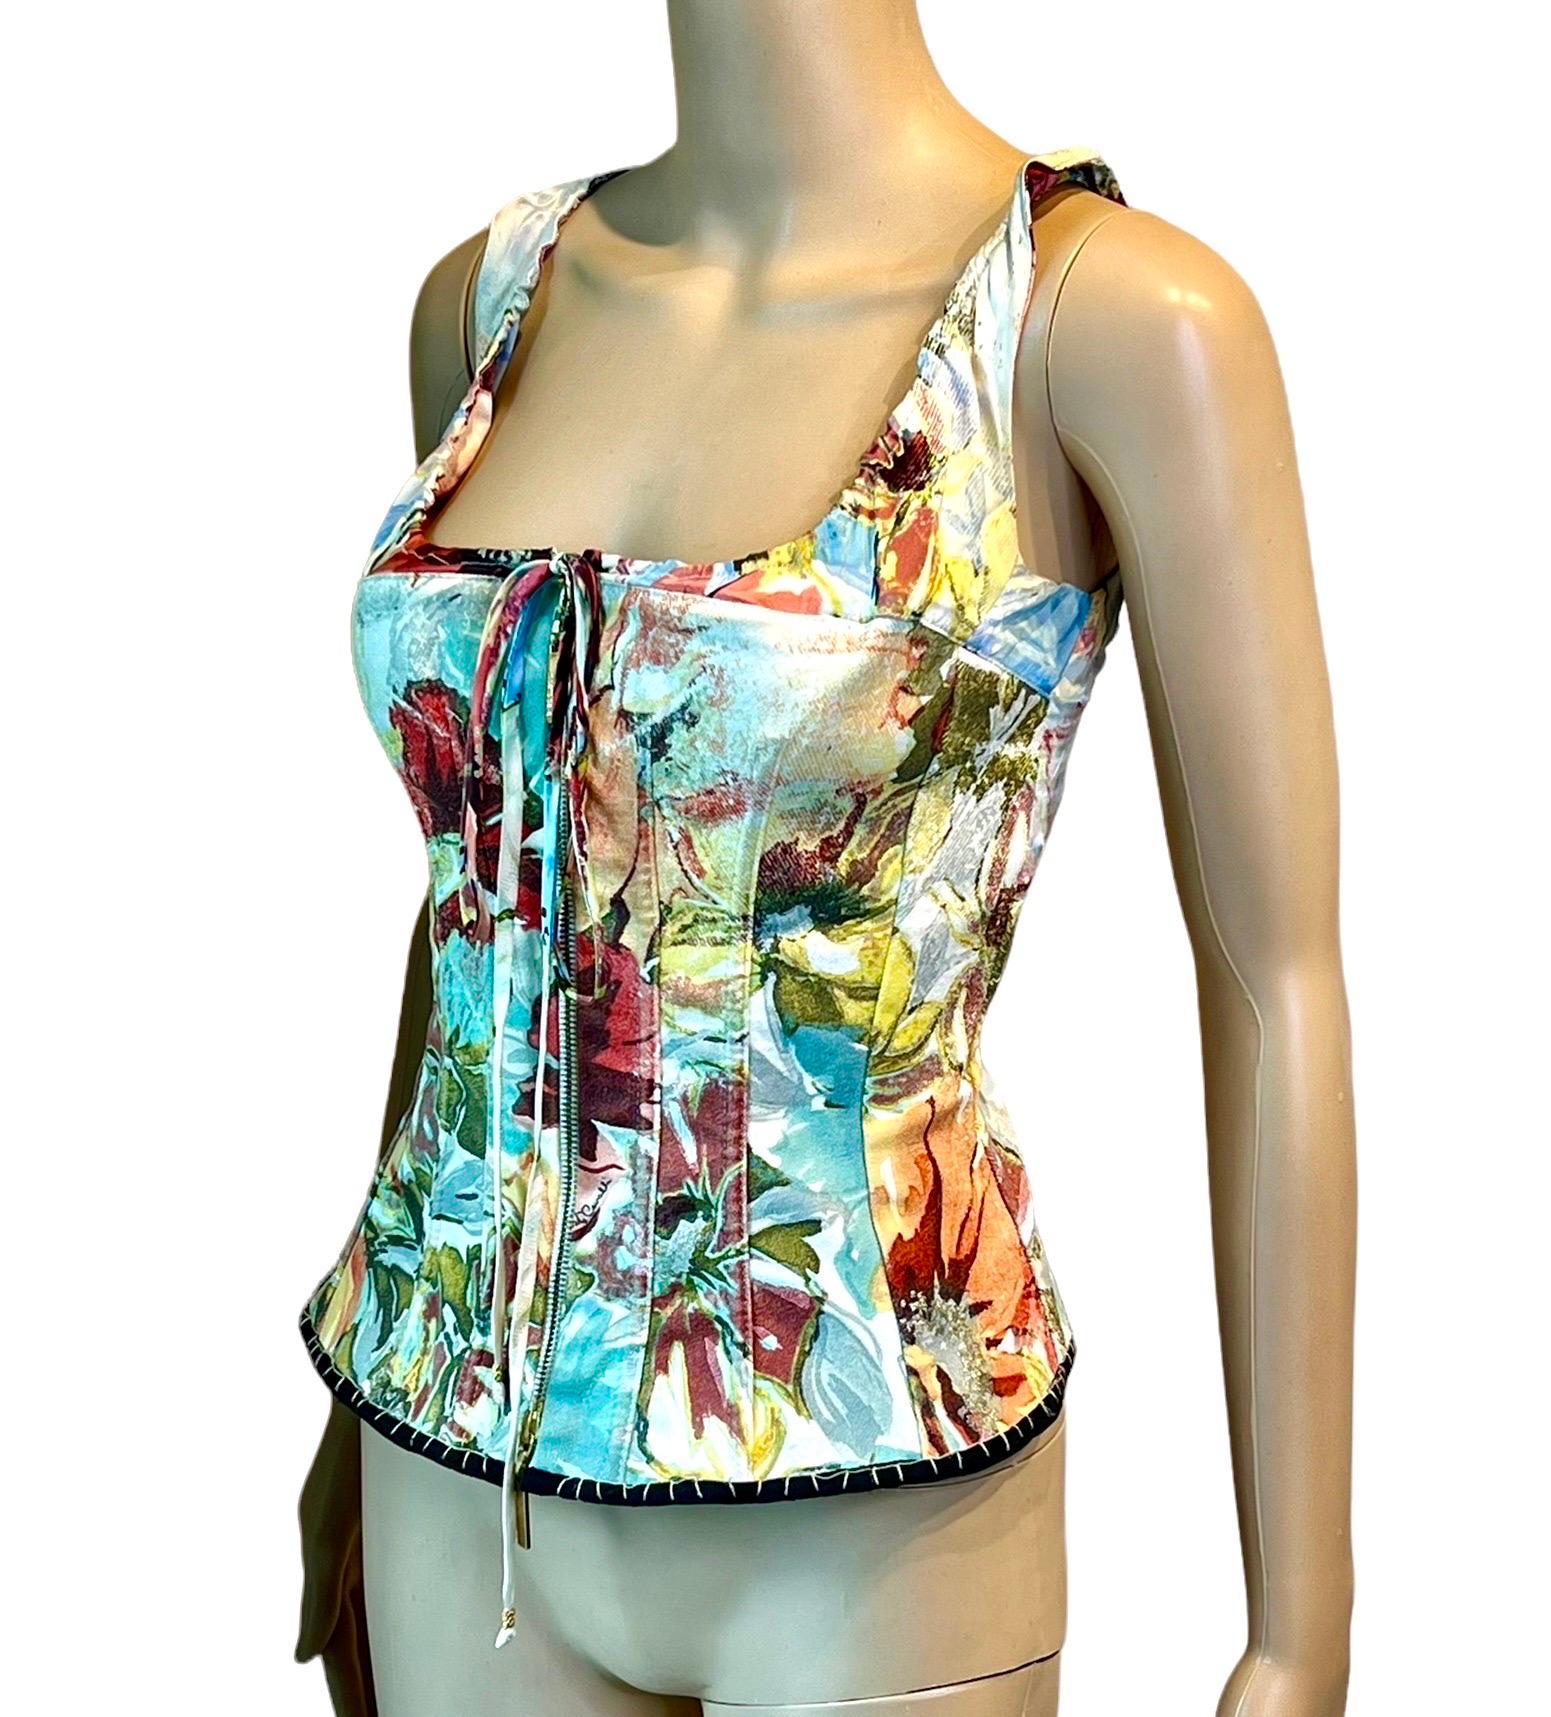 Roberto Cavalli S/S 2003 Bustier Corset Floral Abstract Print Denim Silk Top For Sale 4